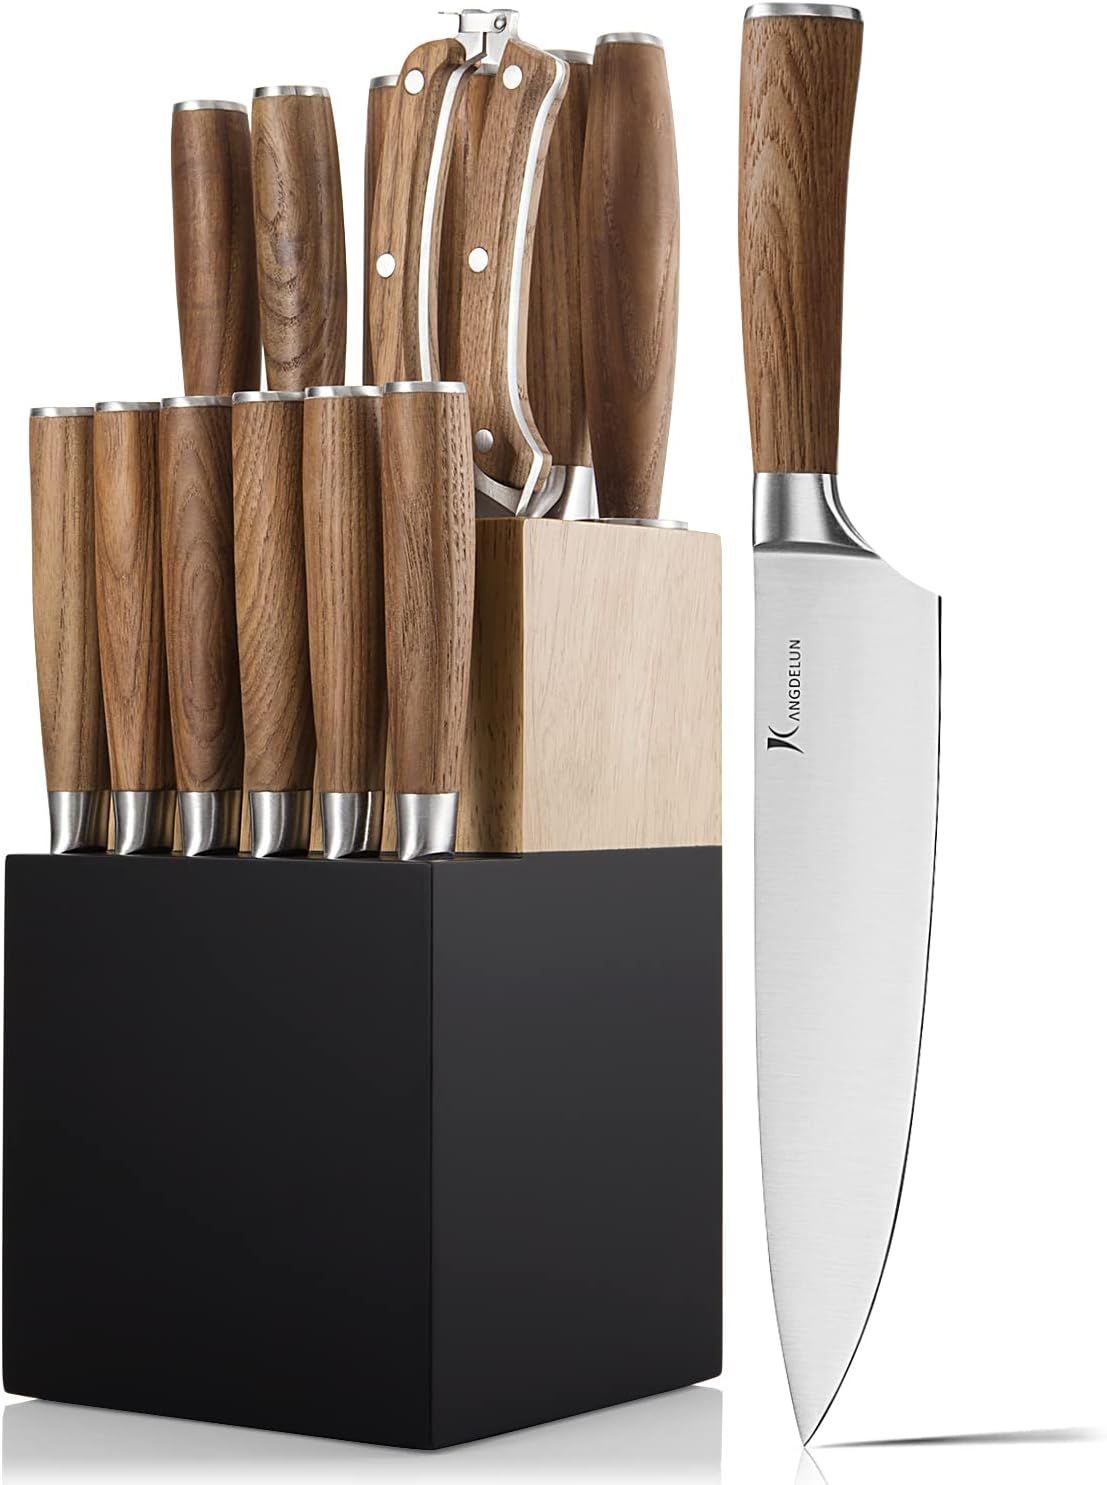 Natura Series 15 PCS Knife Block Set, Ultra Sharp High Carbon Stainless Steel with Wooden Handle | Amazon (US)